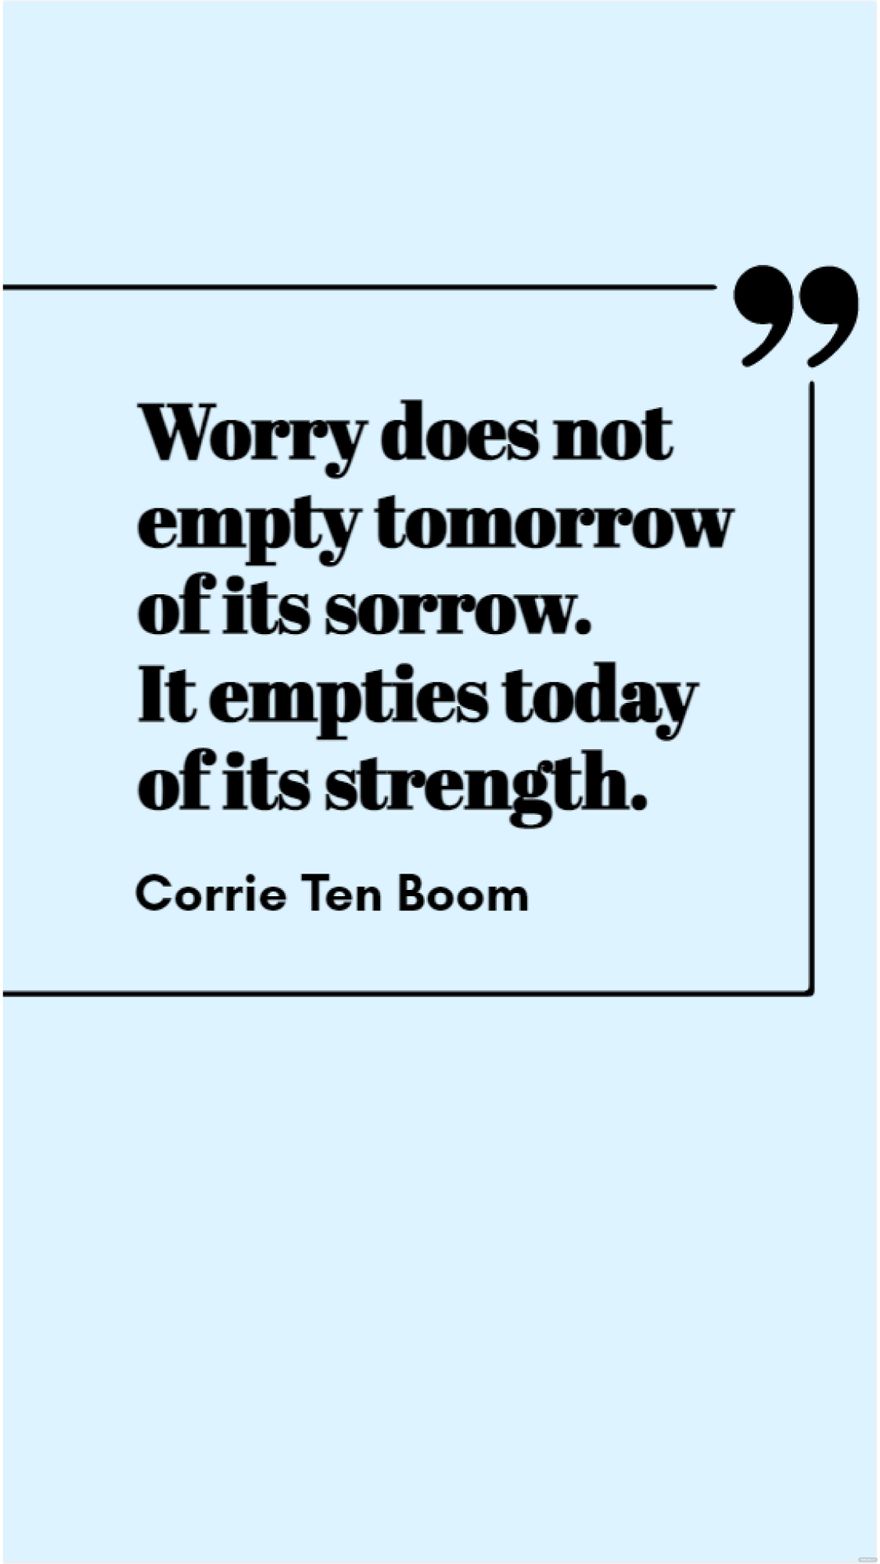 Corrie Ten Boom - Worry does not empty tomorrow of its sorrow. It empties today of its strength.